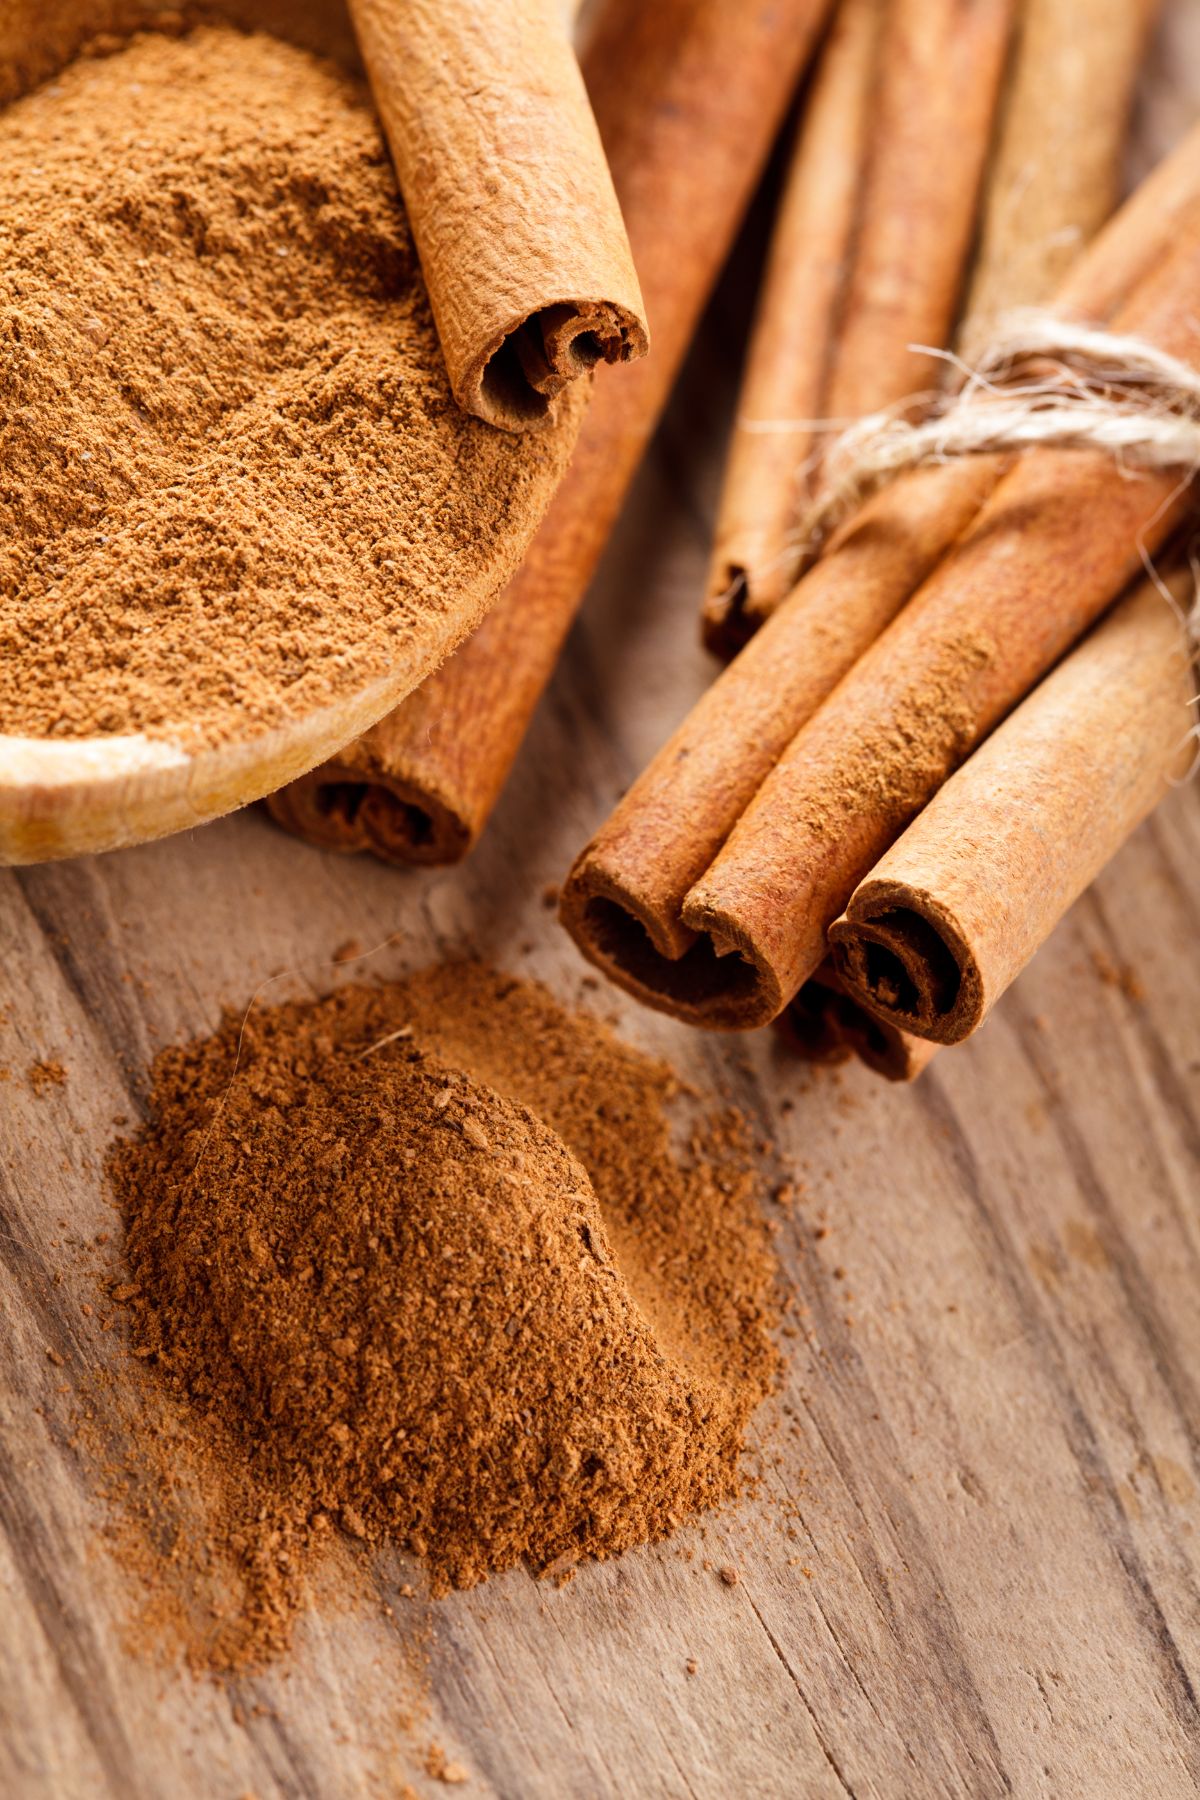 ground cinnamon spilling out of a wooden bowl.